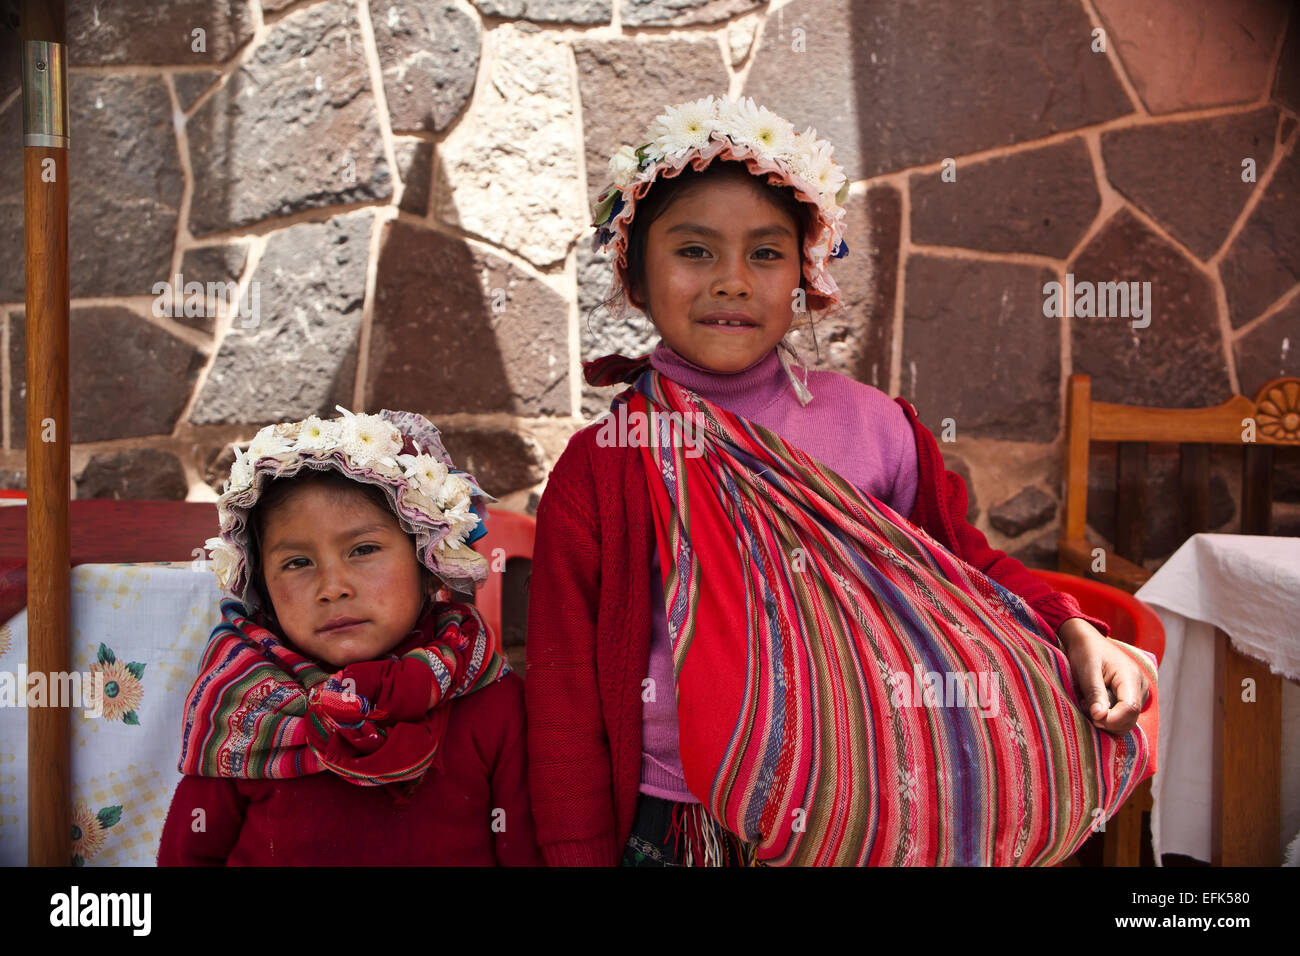 Two girls in traditional dress at Pisac market, Peru. Stock Photo